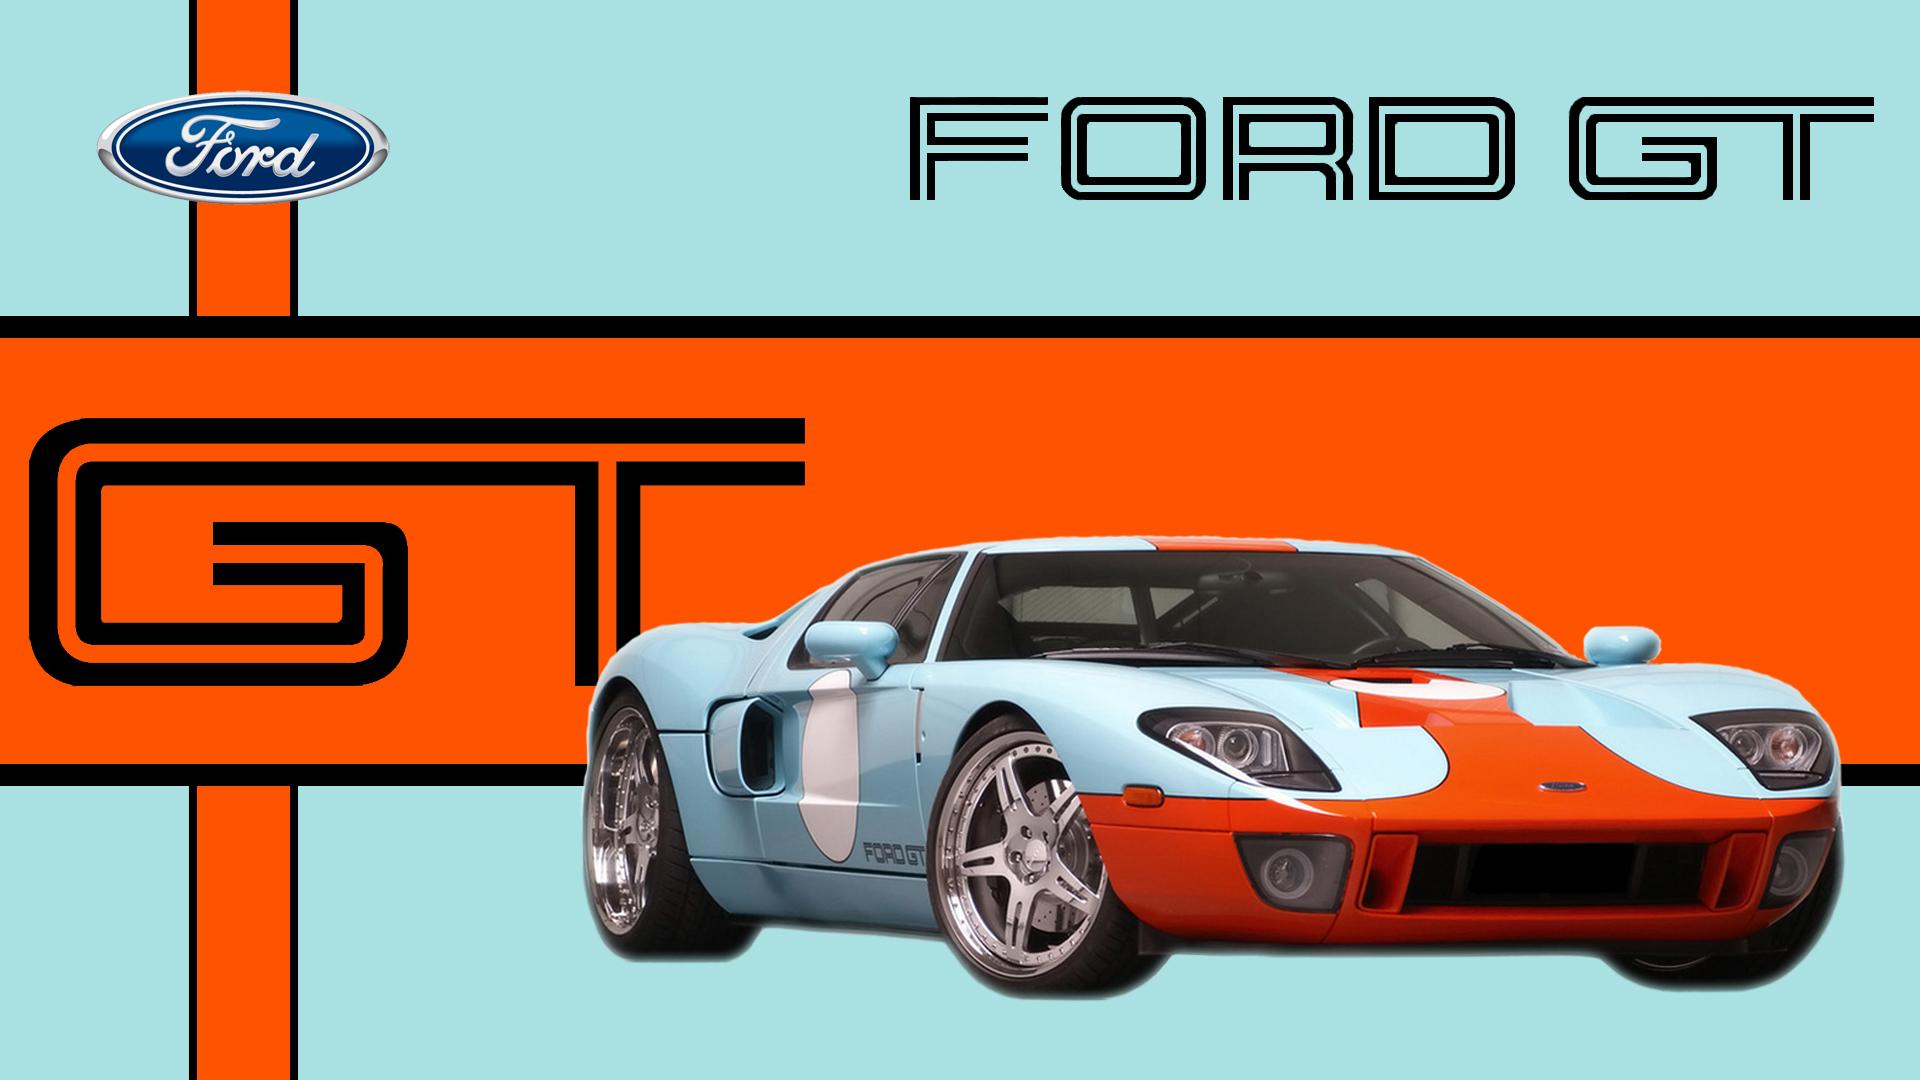 Ford Gt In Gulf Racing Livery Wallpaper Cars Wallpaper Better